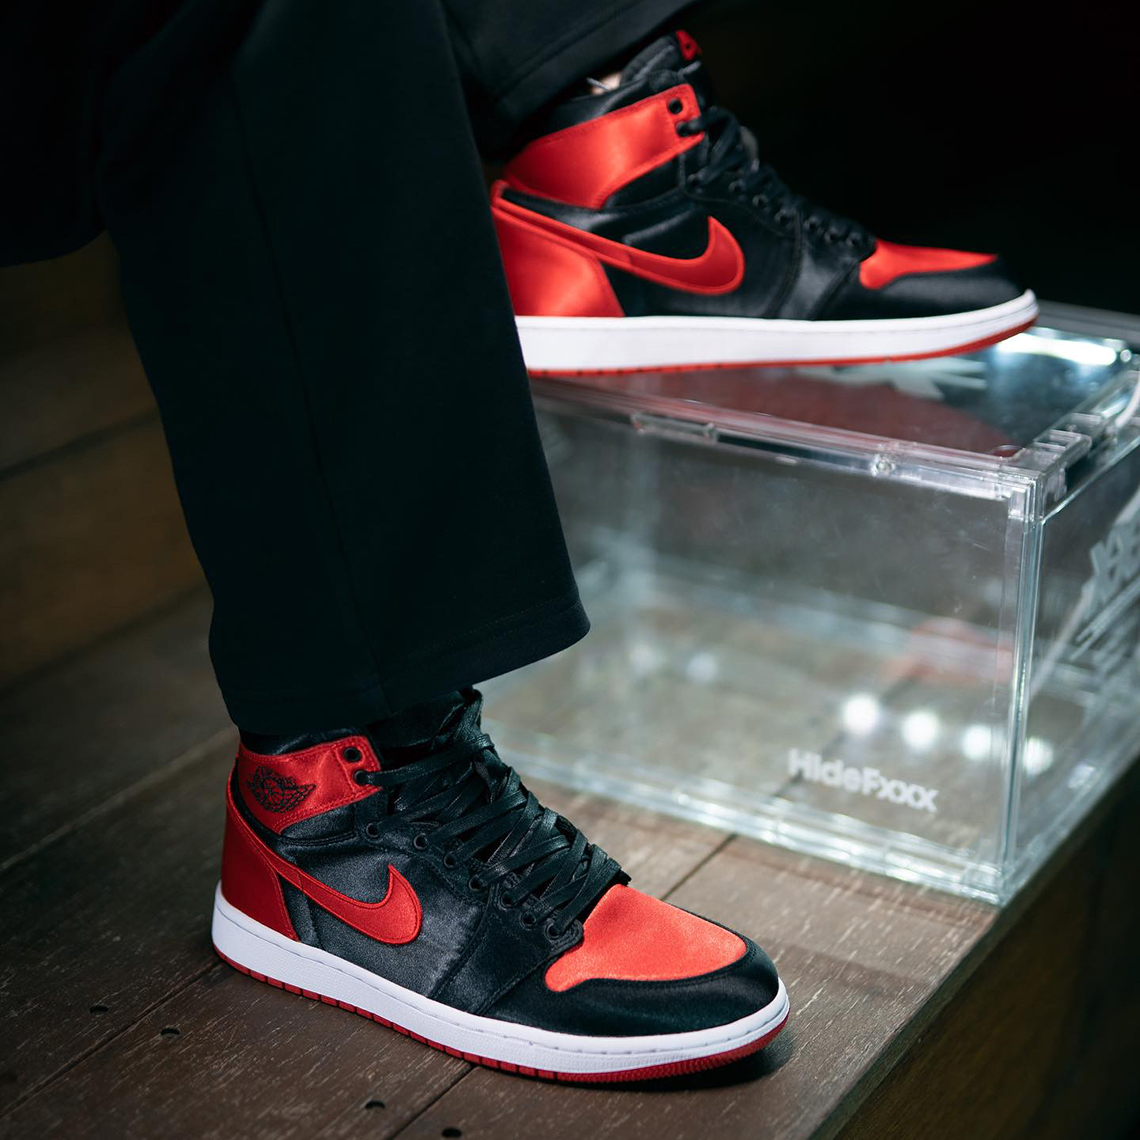 The Air Jordan 1 High OG 'Satin Bred' is one of the rarest birds in the  sneakverse – and it's back